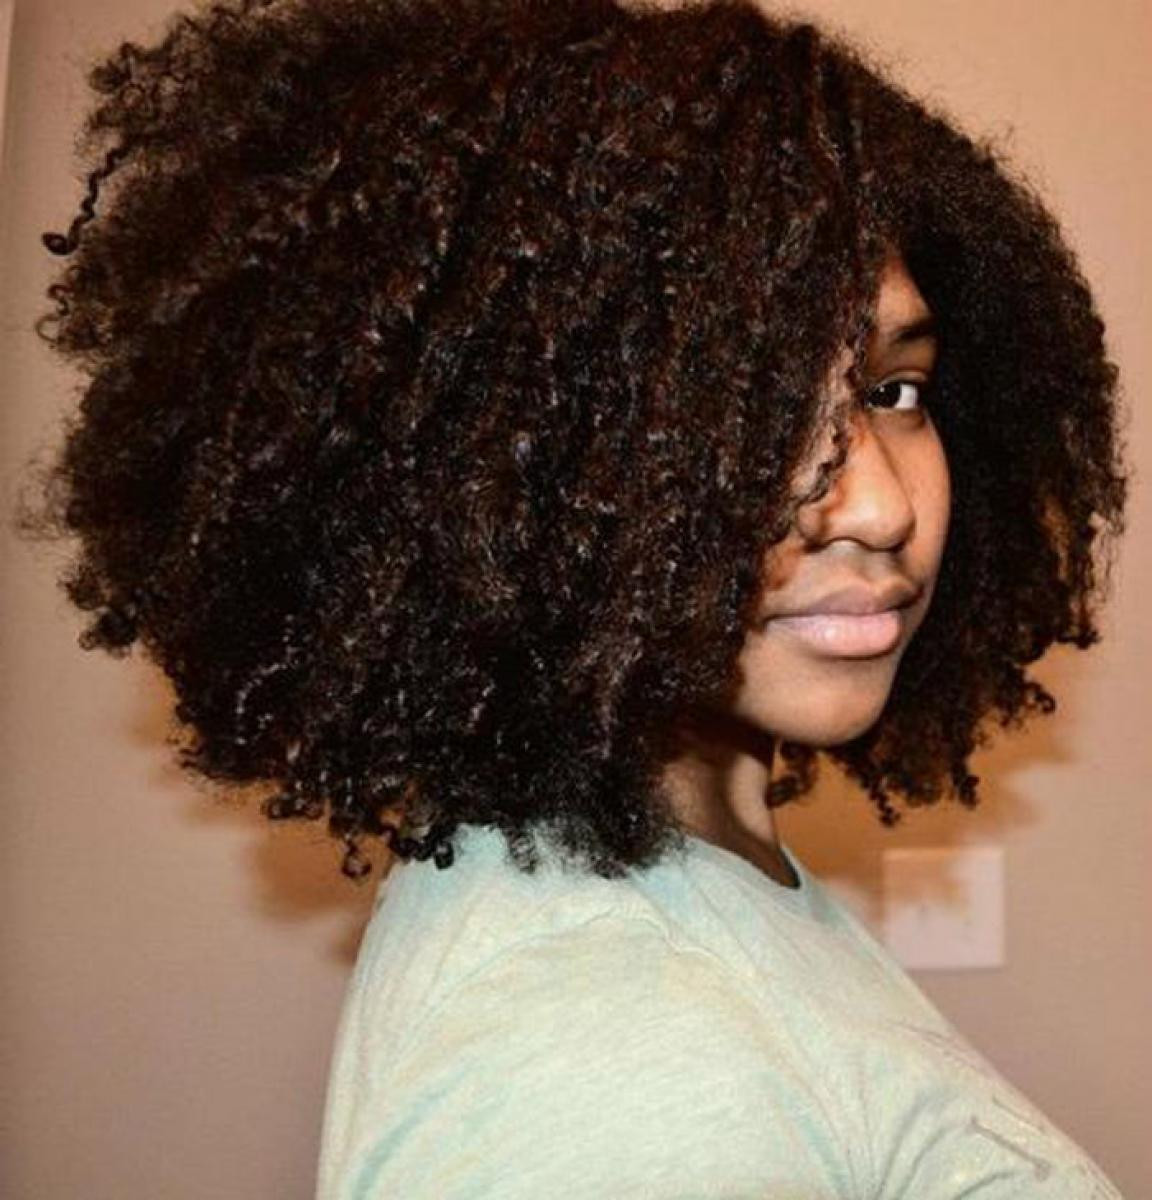 Black Natural Curly Hairstyles For Medium Length Hair
 of Black Natural Curly Hairstyles for Medium